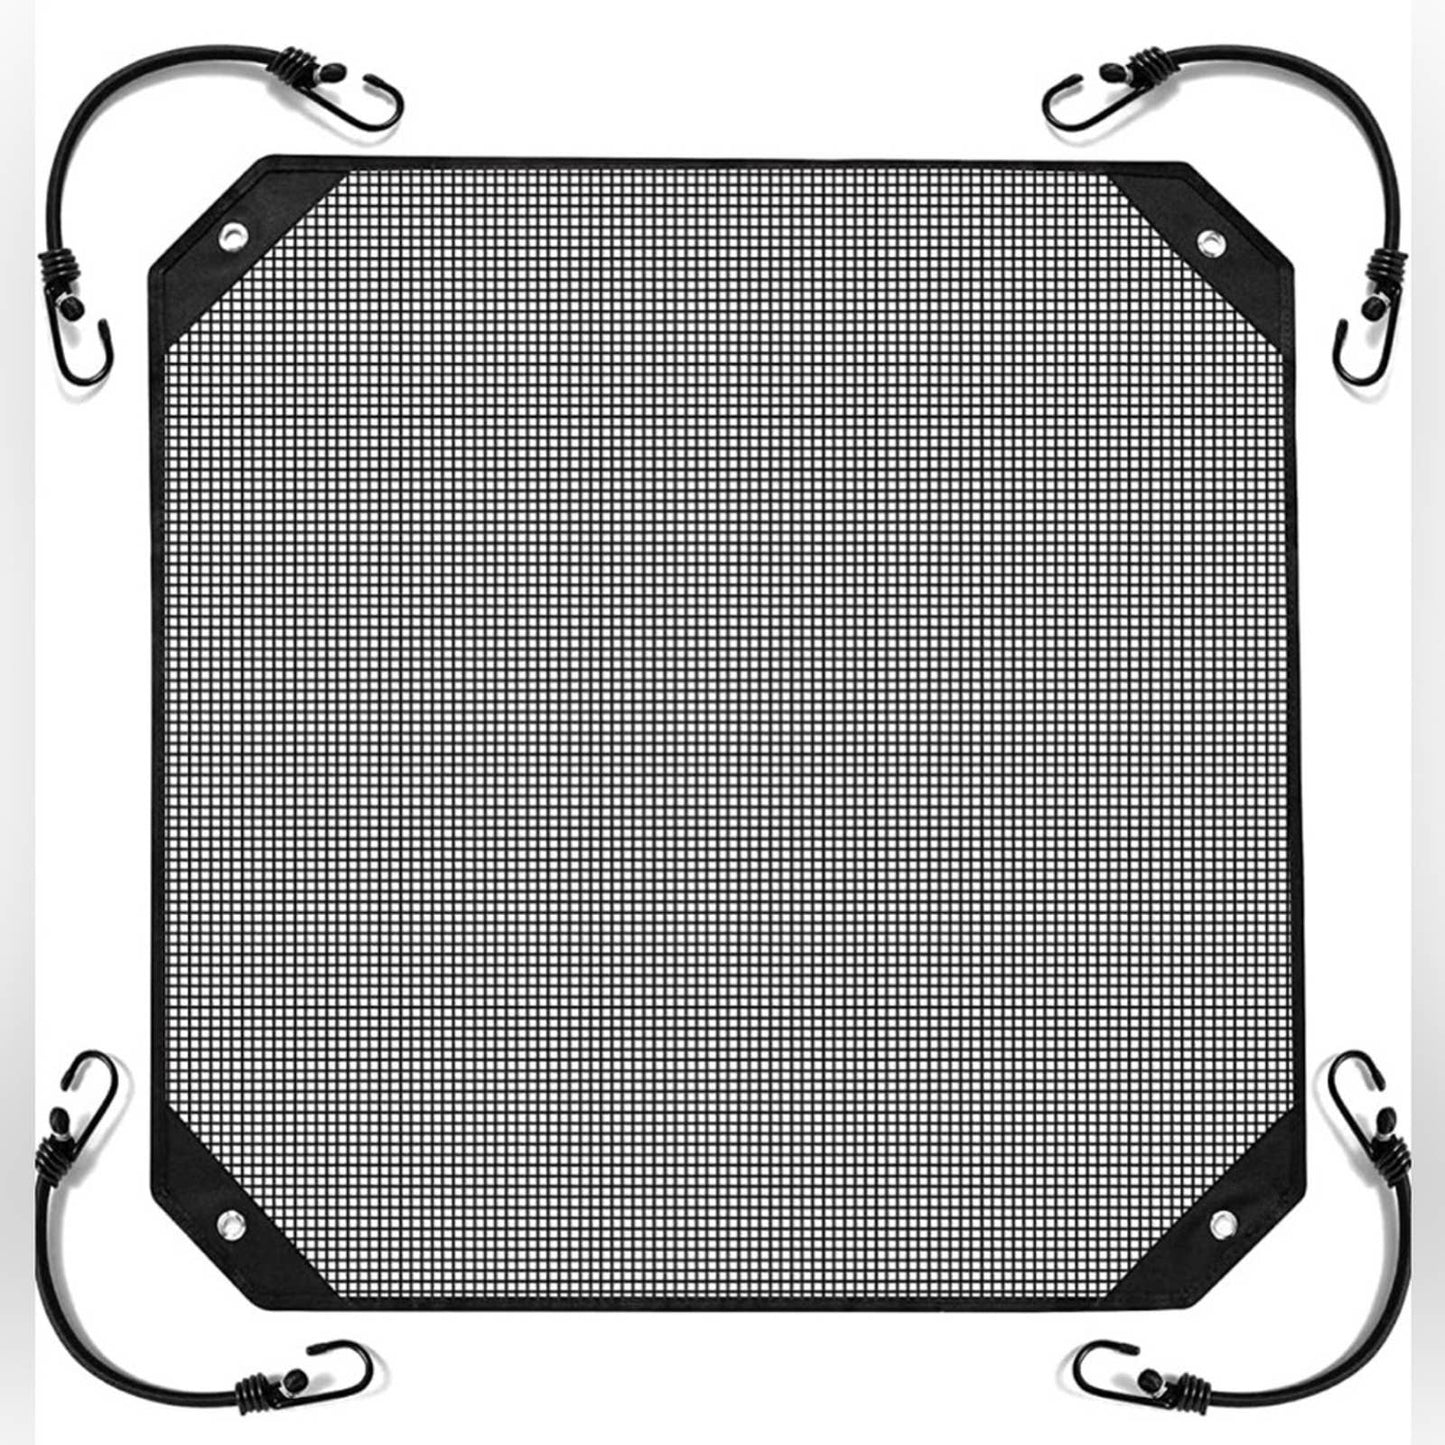 Boyoci Central Air Conditioner Cover for Outside Units, Durable(Mesh, 36" x 36")